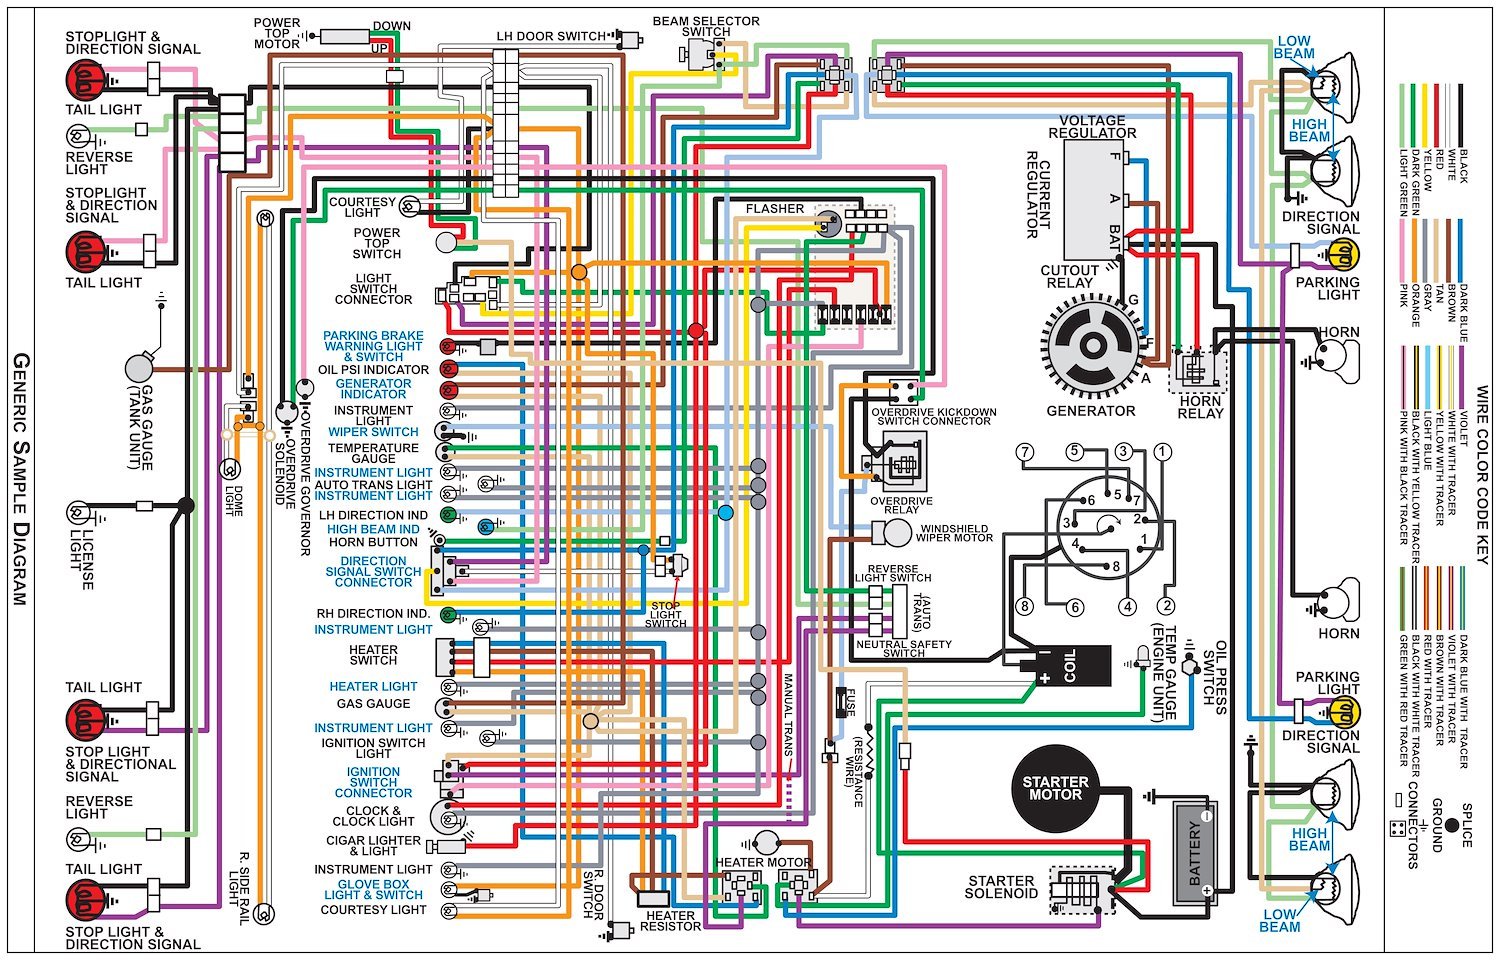 Wiring Diagram for 1965 Ford E-Series (Econoline), 11 in x 17 in., Laminated